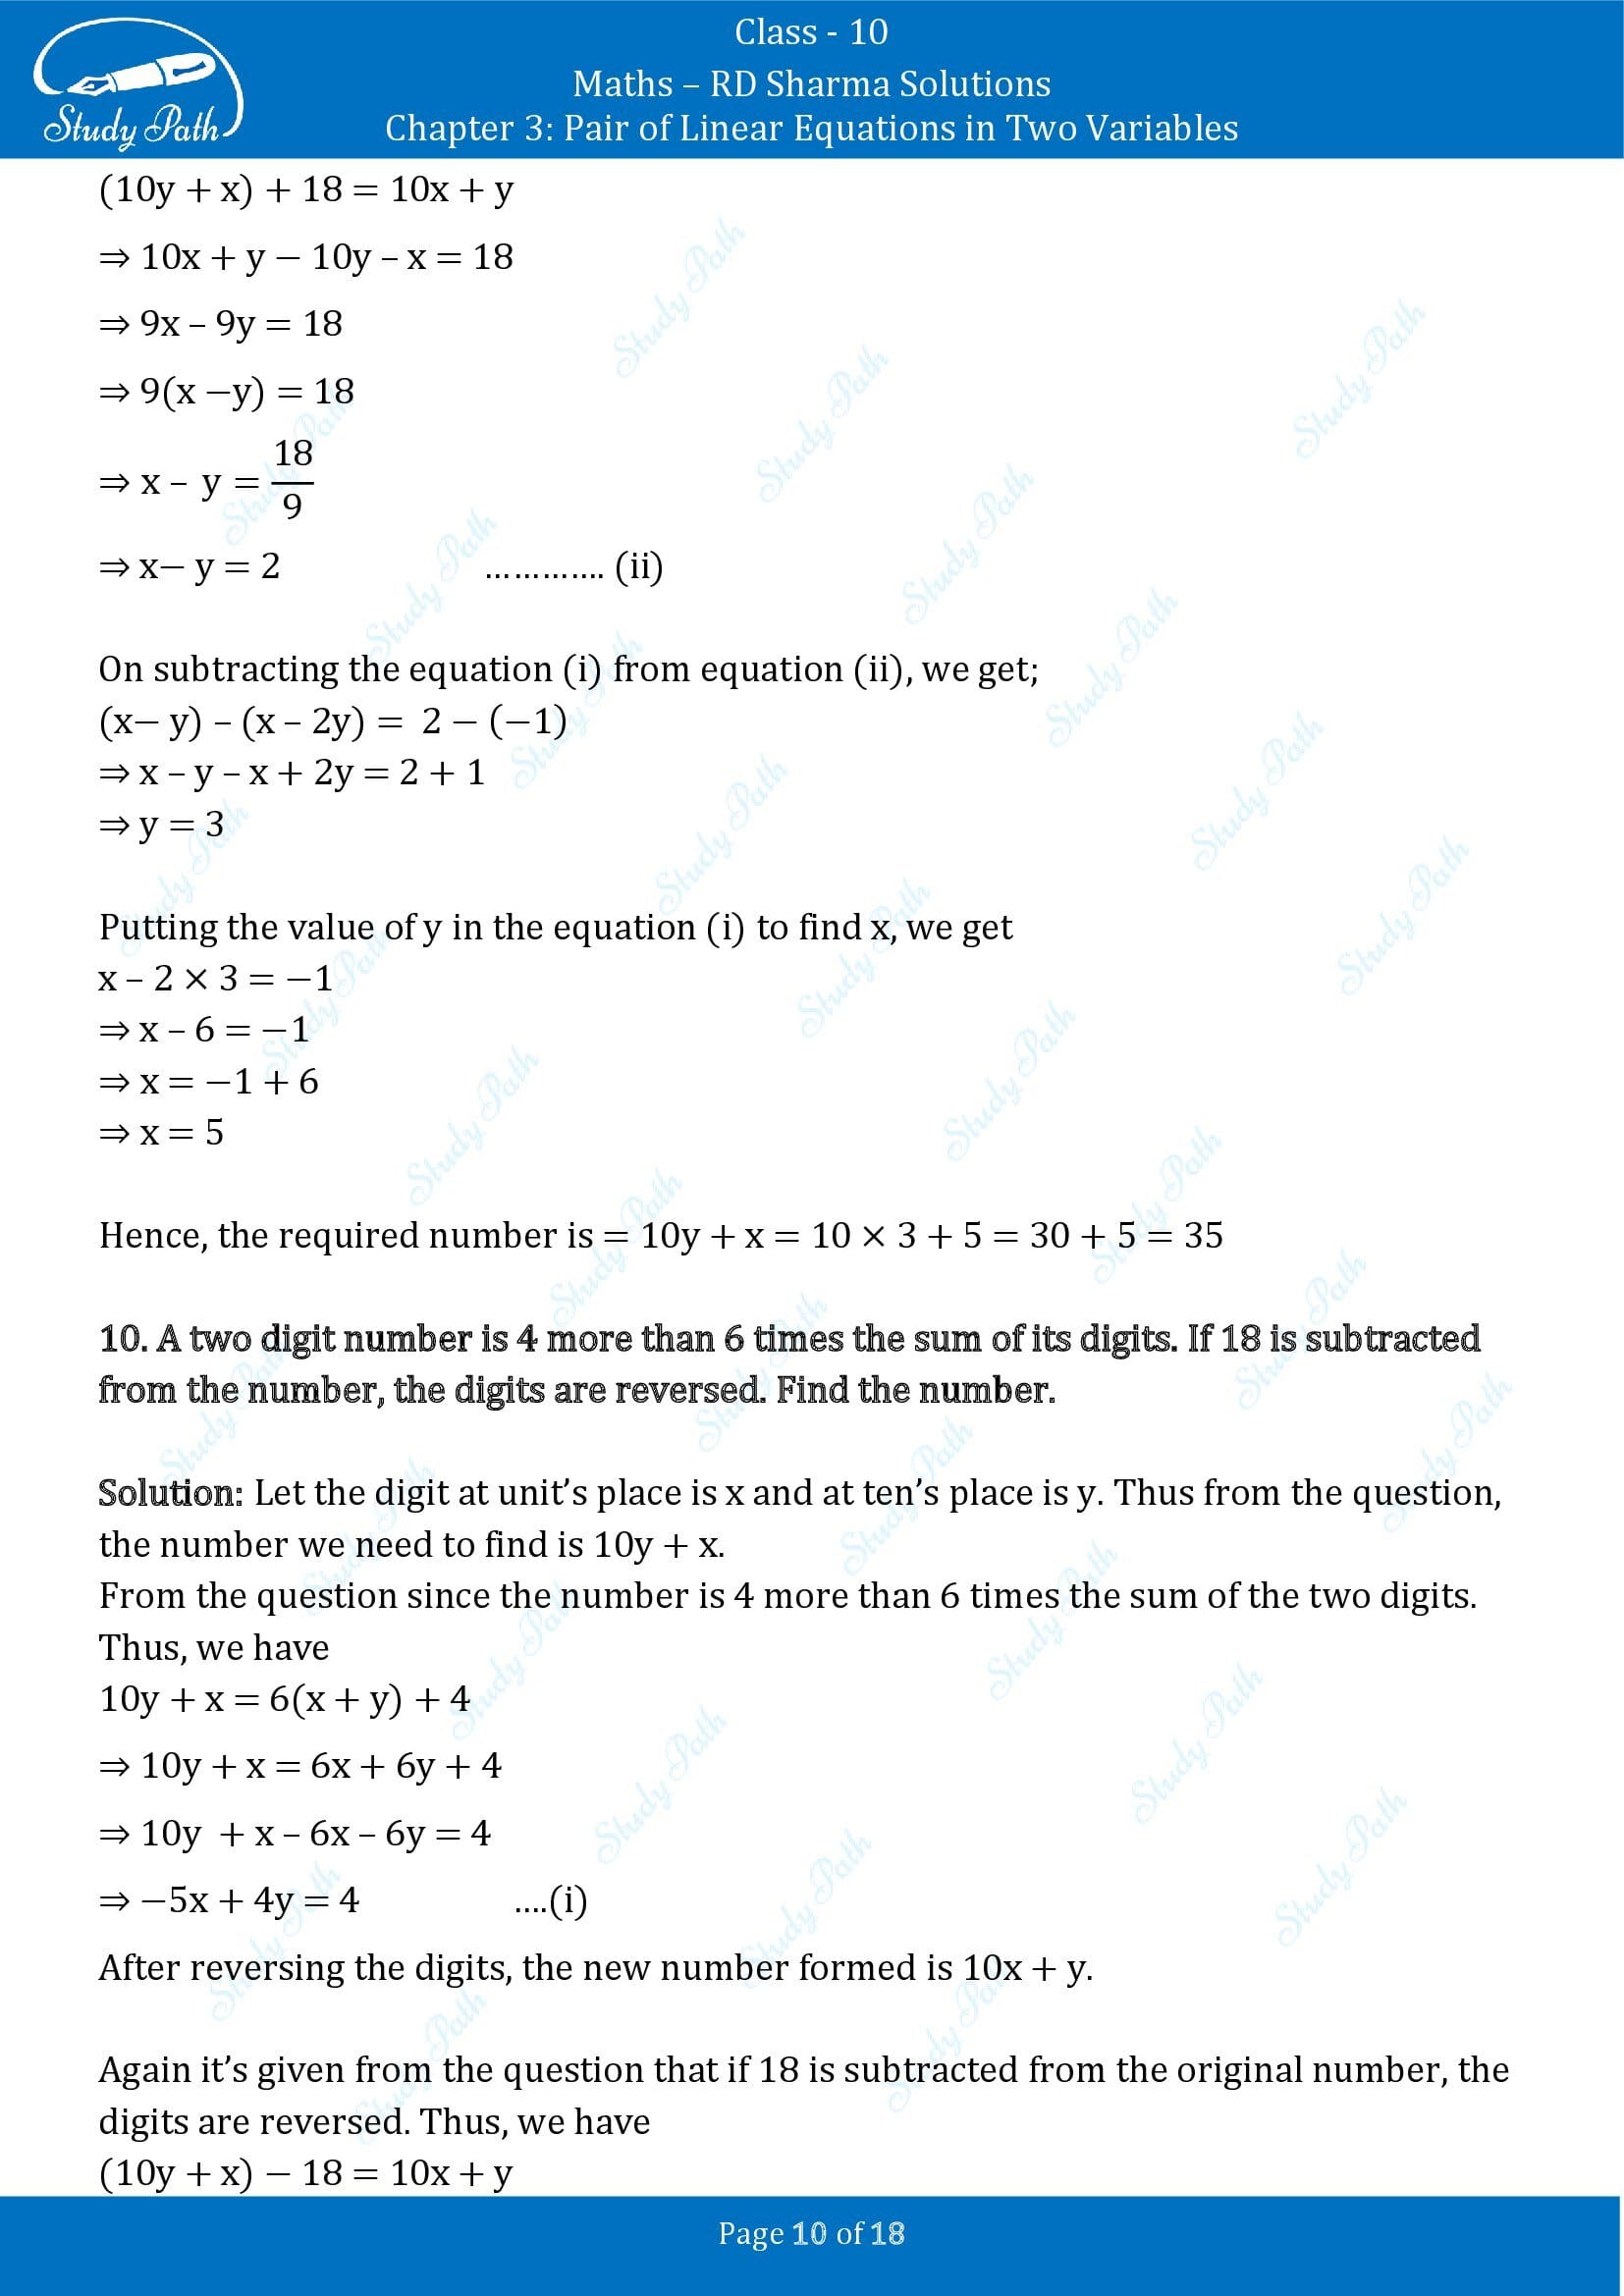 RD Sharma Solutions Class 10 Chapter 3 Pair of Linear Equations in Two Variables Exercise 3.7 00010